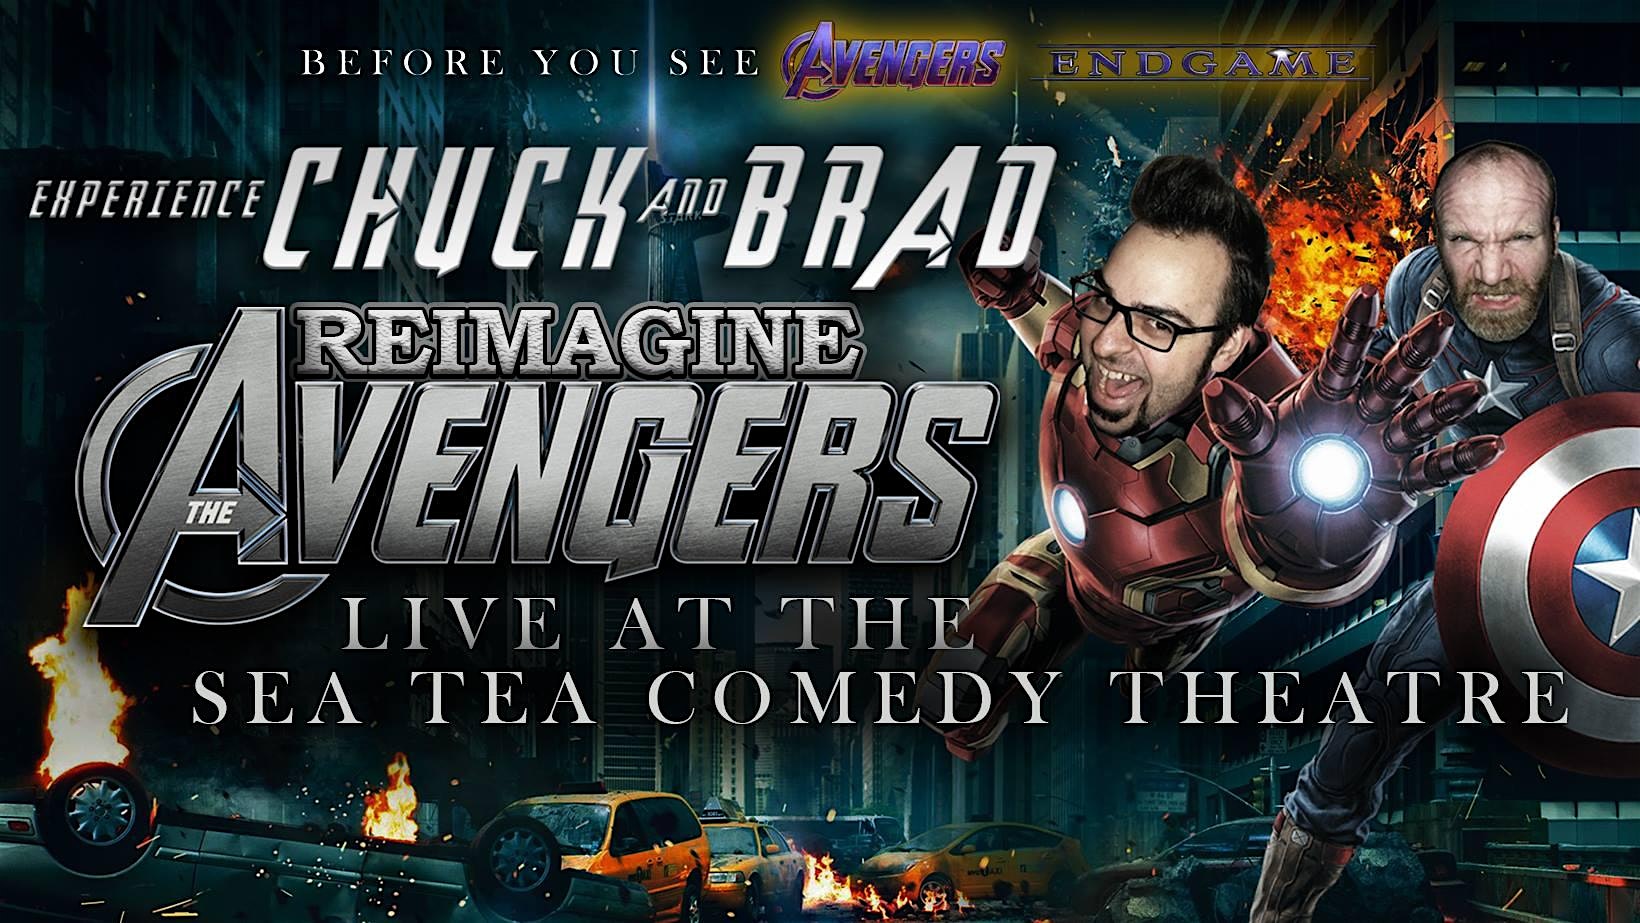 Chuck and Brad Reimagine "The Avengers"